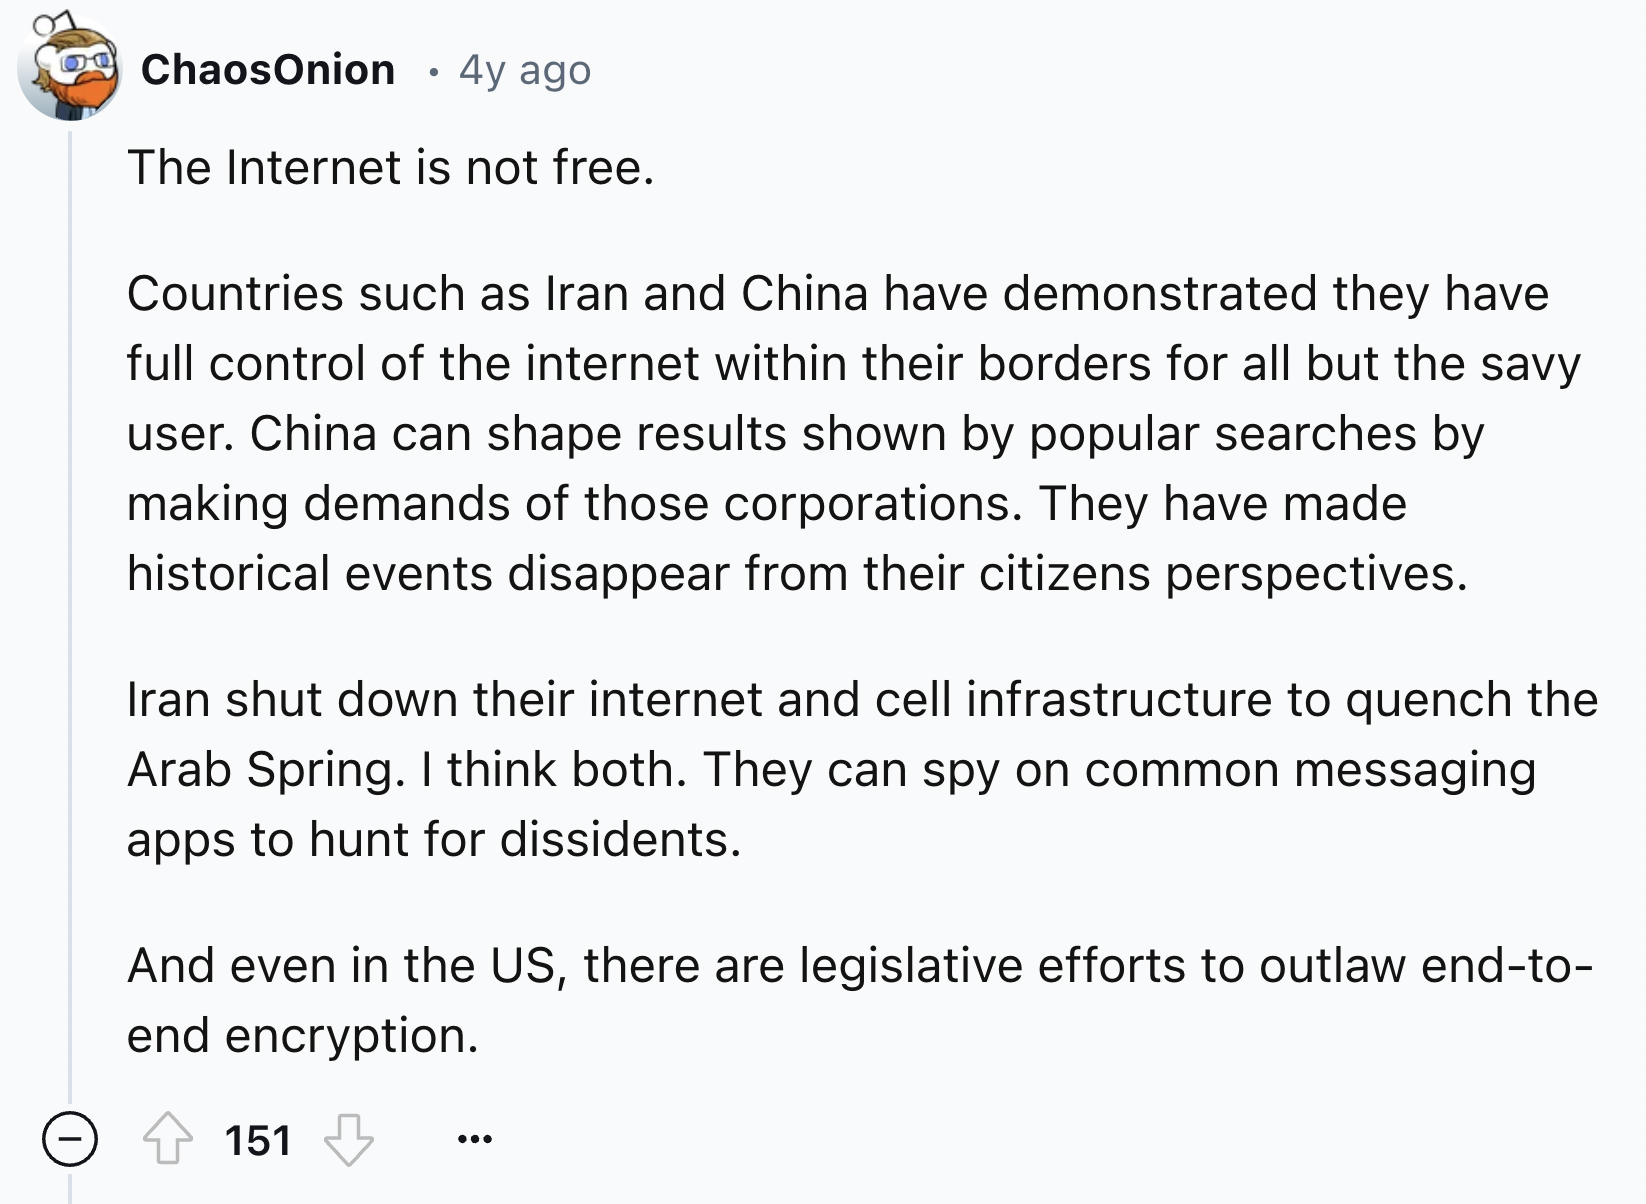 document - ChaosOnion 4y ago The Internet is not free. Countries such as Iran and China have demonstrated they have full control of the internet within their borders for all but the savy user. China can shape results shown by popular searches by making de